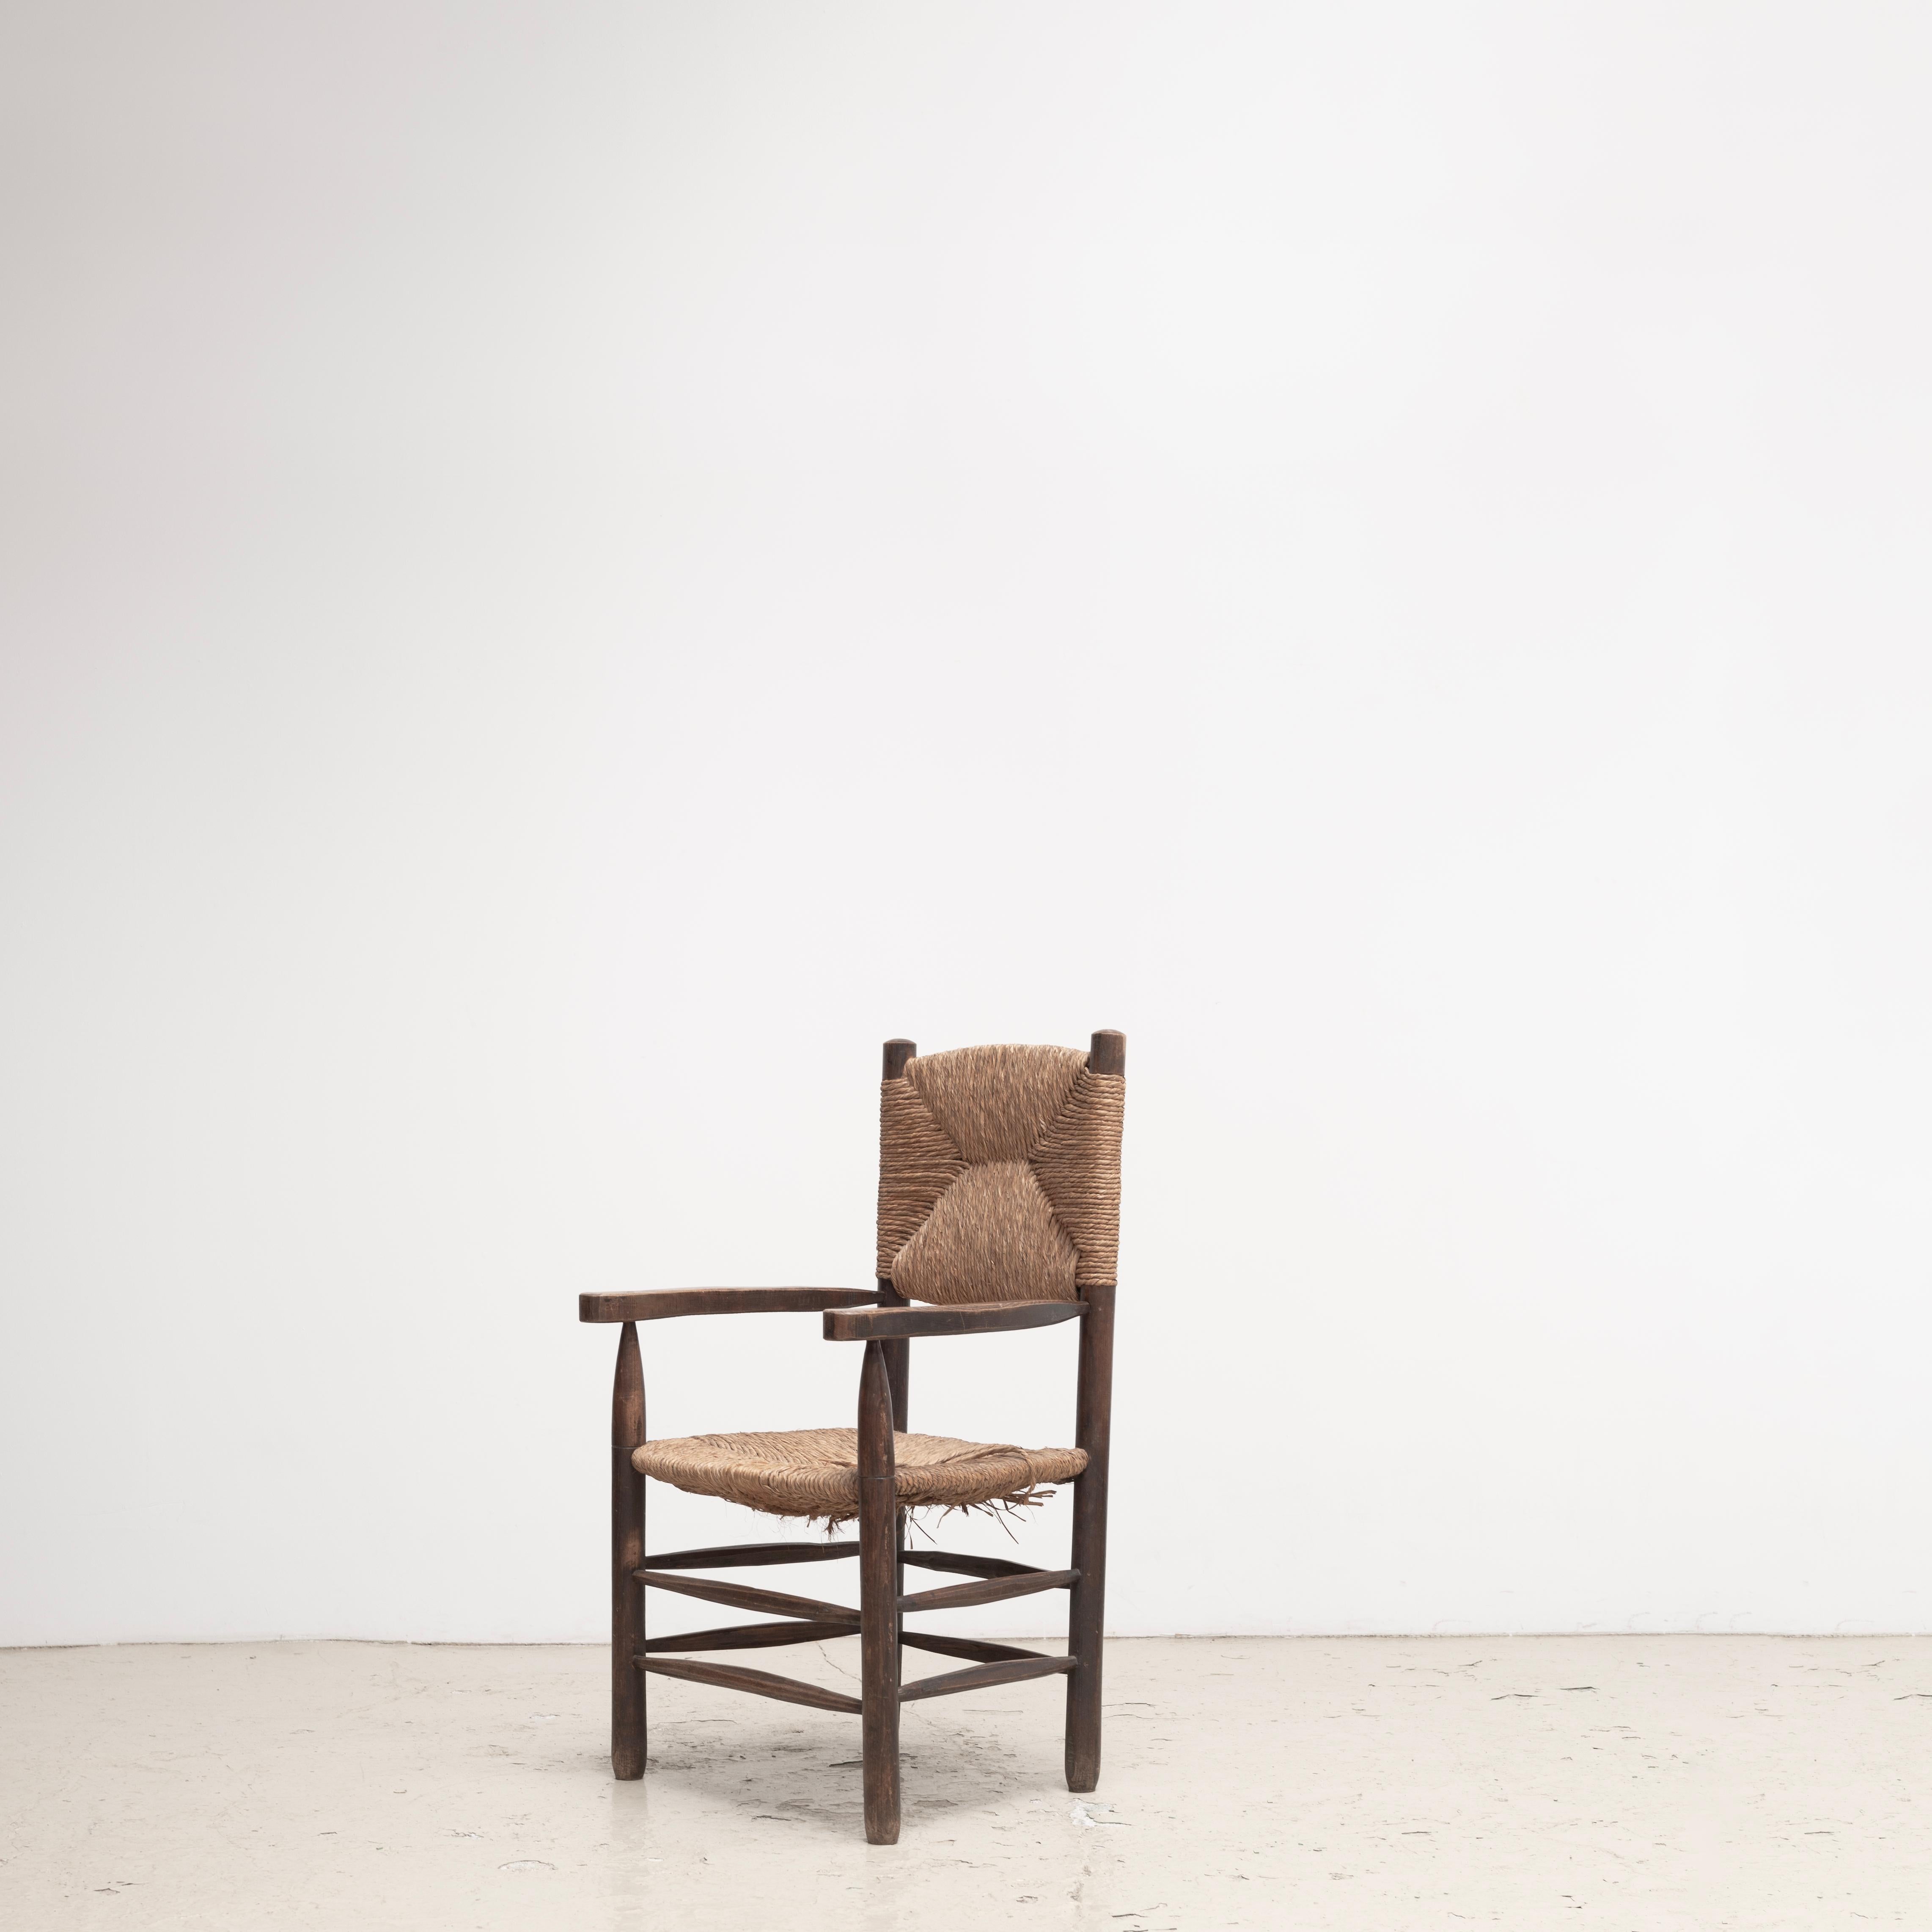 PIERRE JEANNERET  , Rush Arm Chair 1950s , attributed
There is some damage to the seat, so it can be repaired.